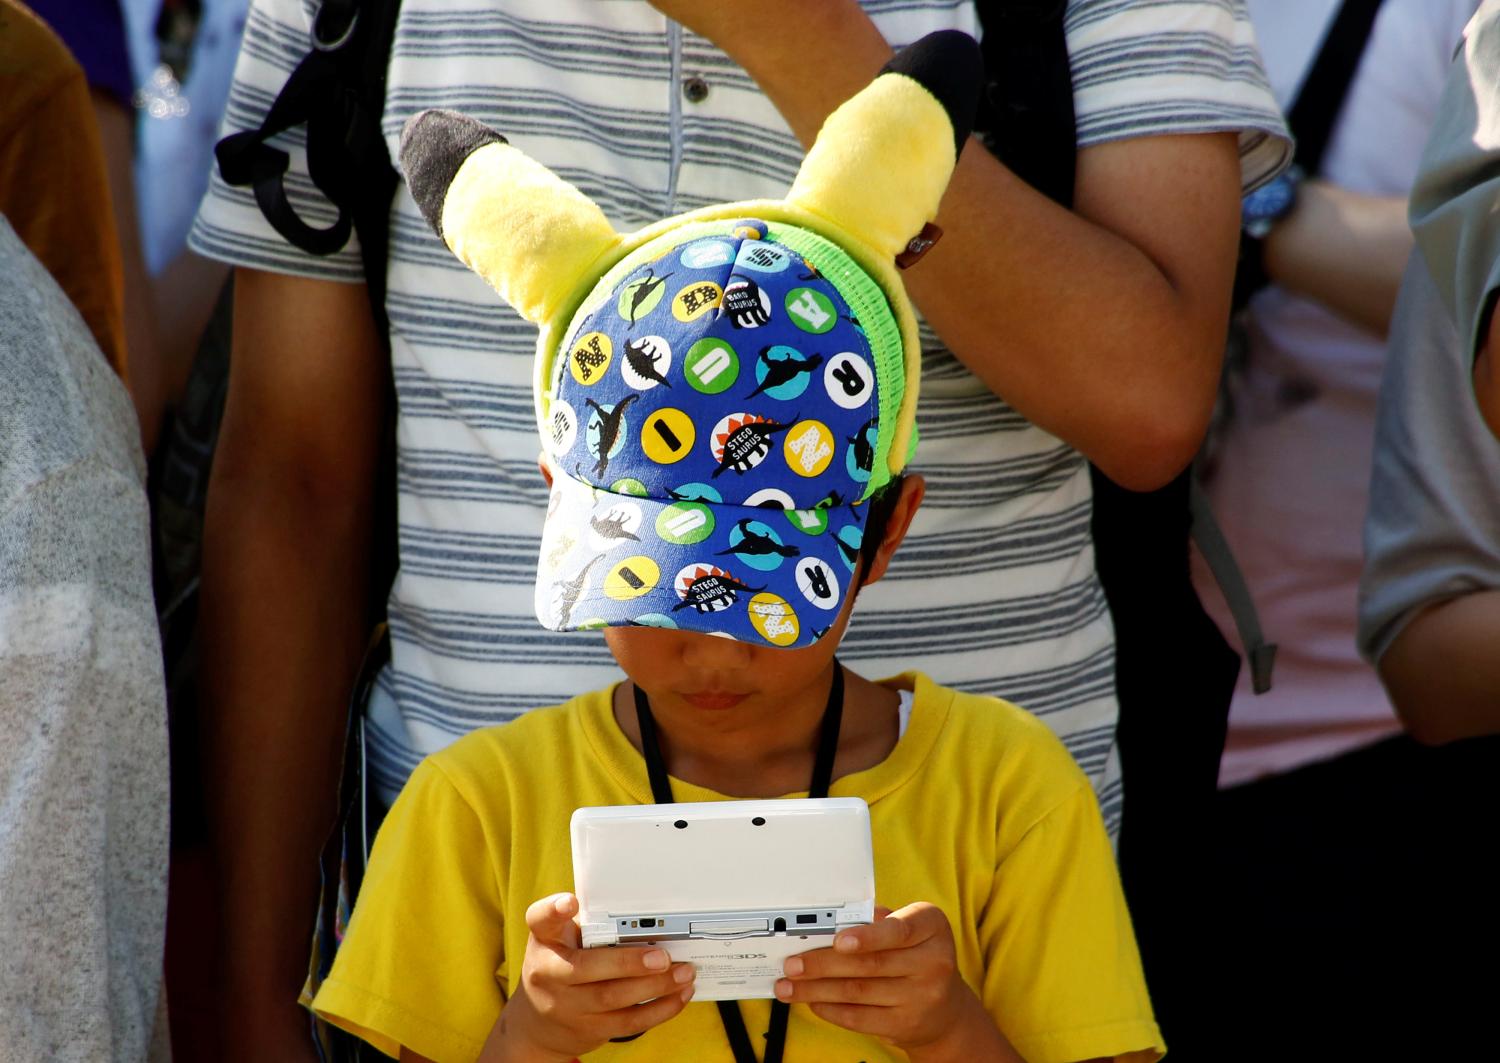 A boy plays Nintendo's game console prior to a parade where Pokemon's character Pikachu attends, in Yokohama, Japan, August 7, 2016. Picture taken on August 7, 2016. REUTERS/Kim Kyung-Hoon - S1AEUJDOXRAB